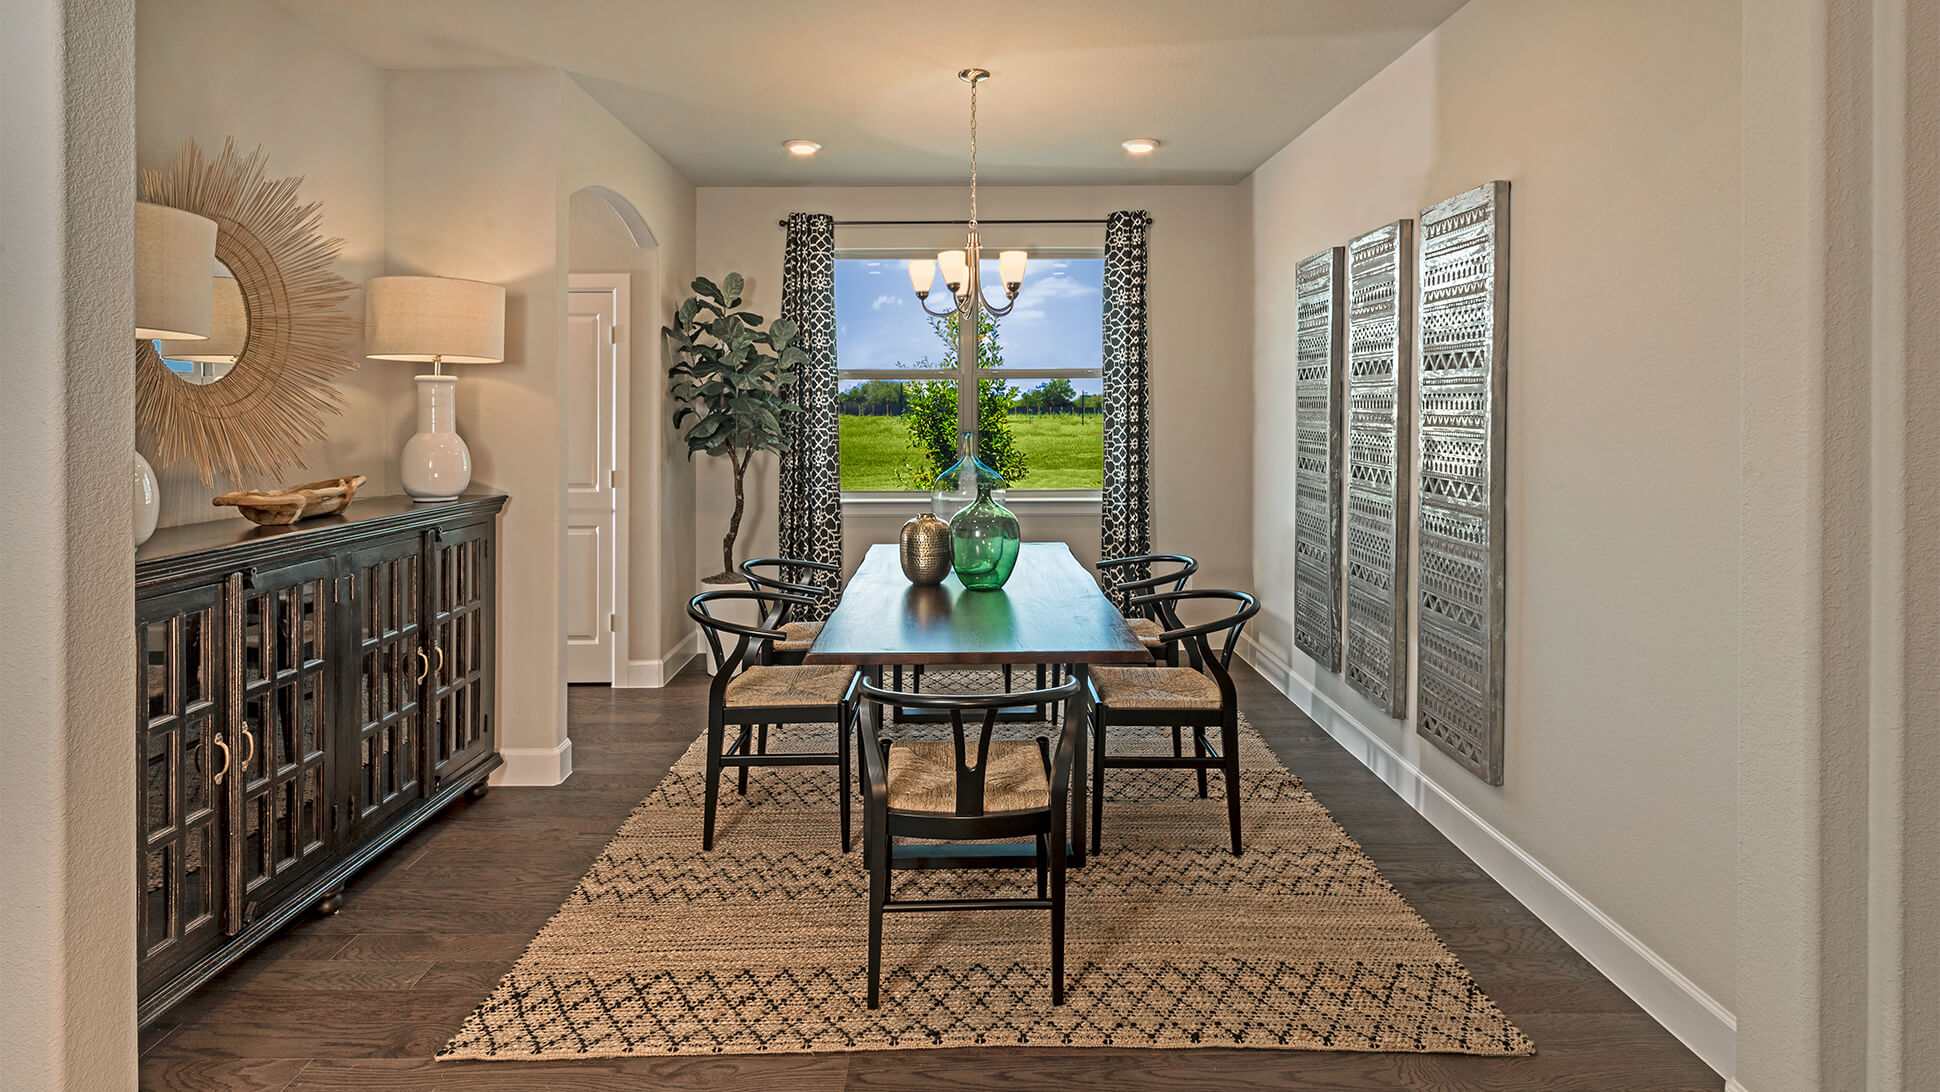 Modern dining room with a wooden table, black chairs, and a view of the garden through large windows in new homes in Mansfield TX.